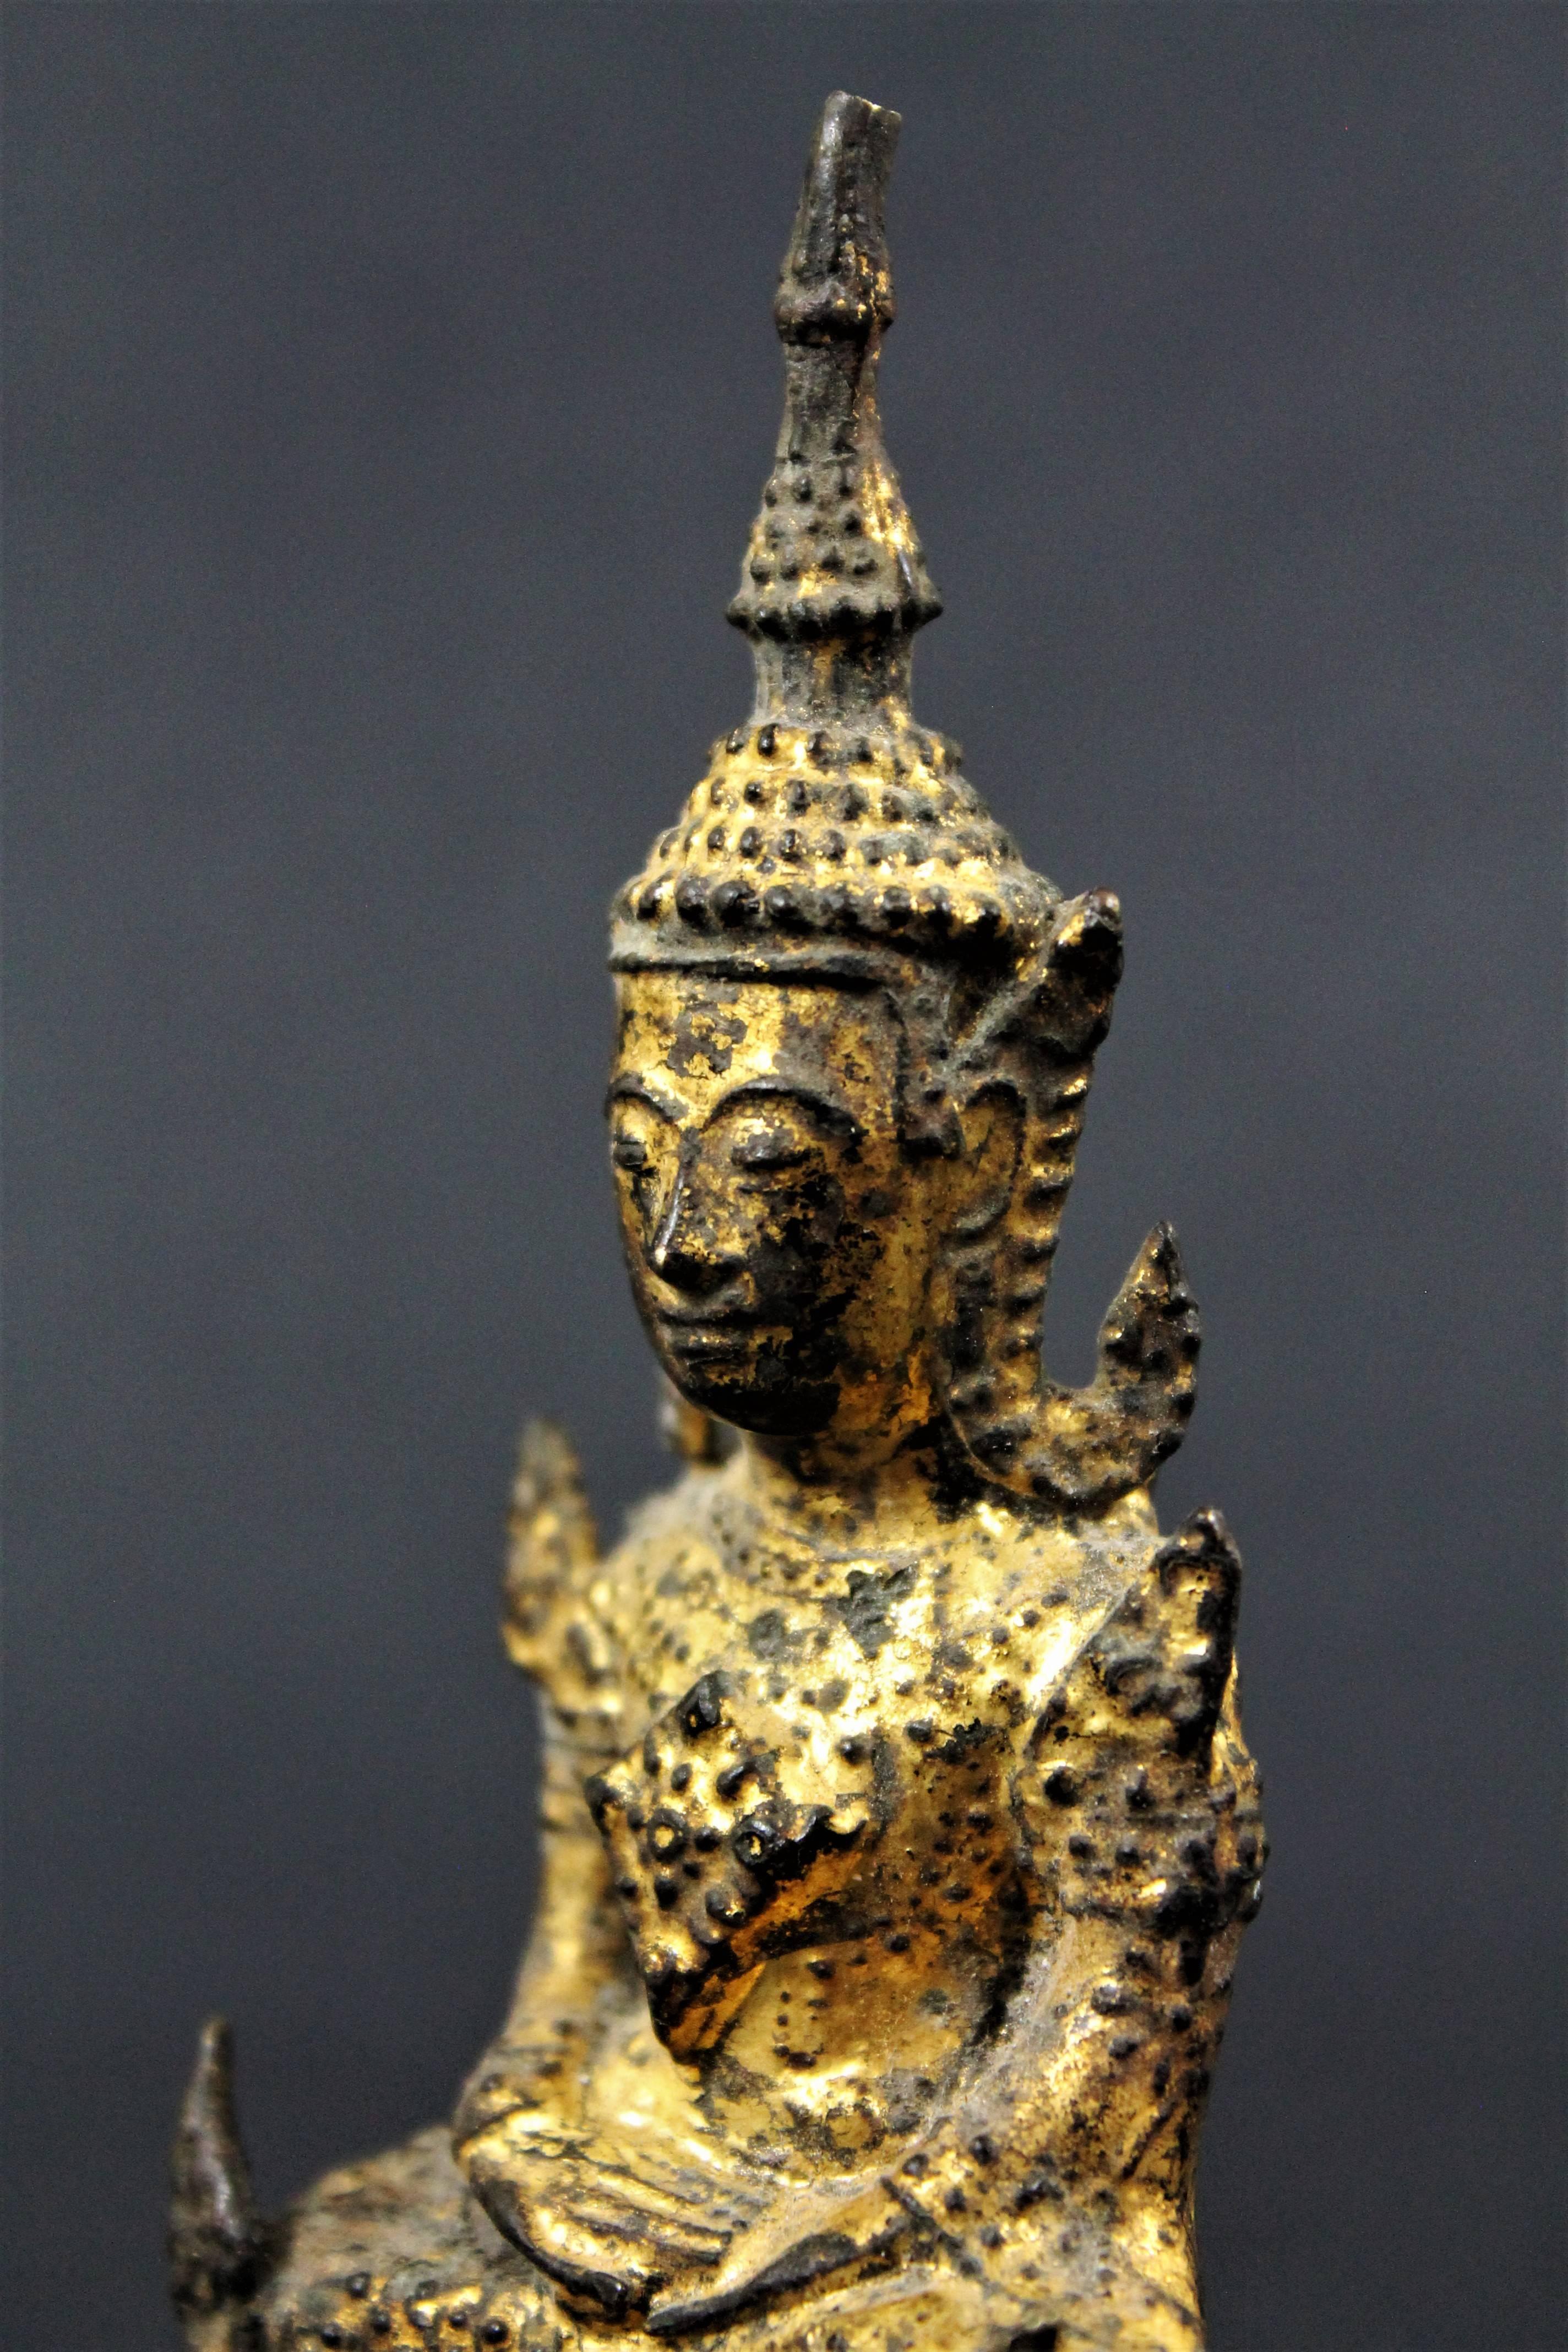  19th Century Thai Siam Rattanakosin Buddha
Guilt-Lacquered Bronze Buddha seated in deep meditation (Virasana) on a stepped throne. The Unisa or flame above the head symbolizes attainment of Nirvana or is indicative of supreme knowledge. 

